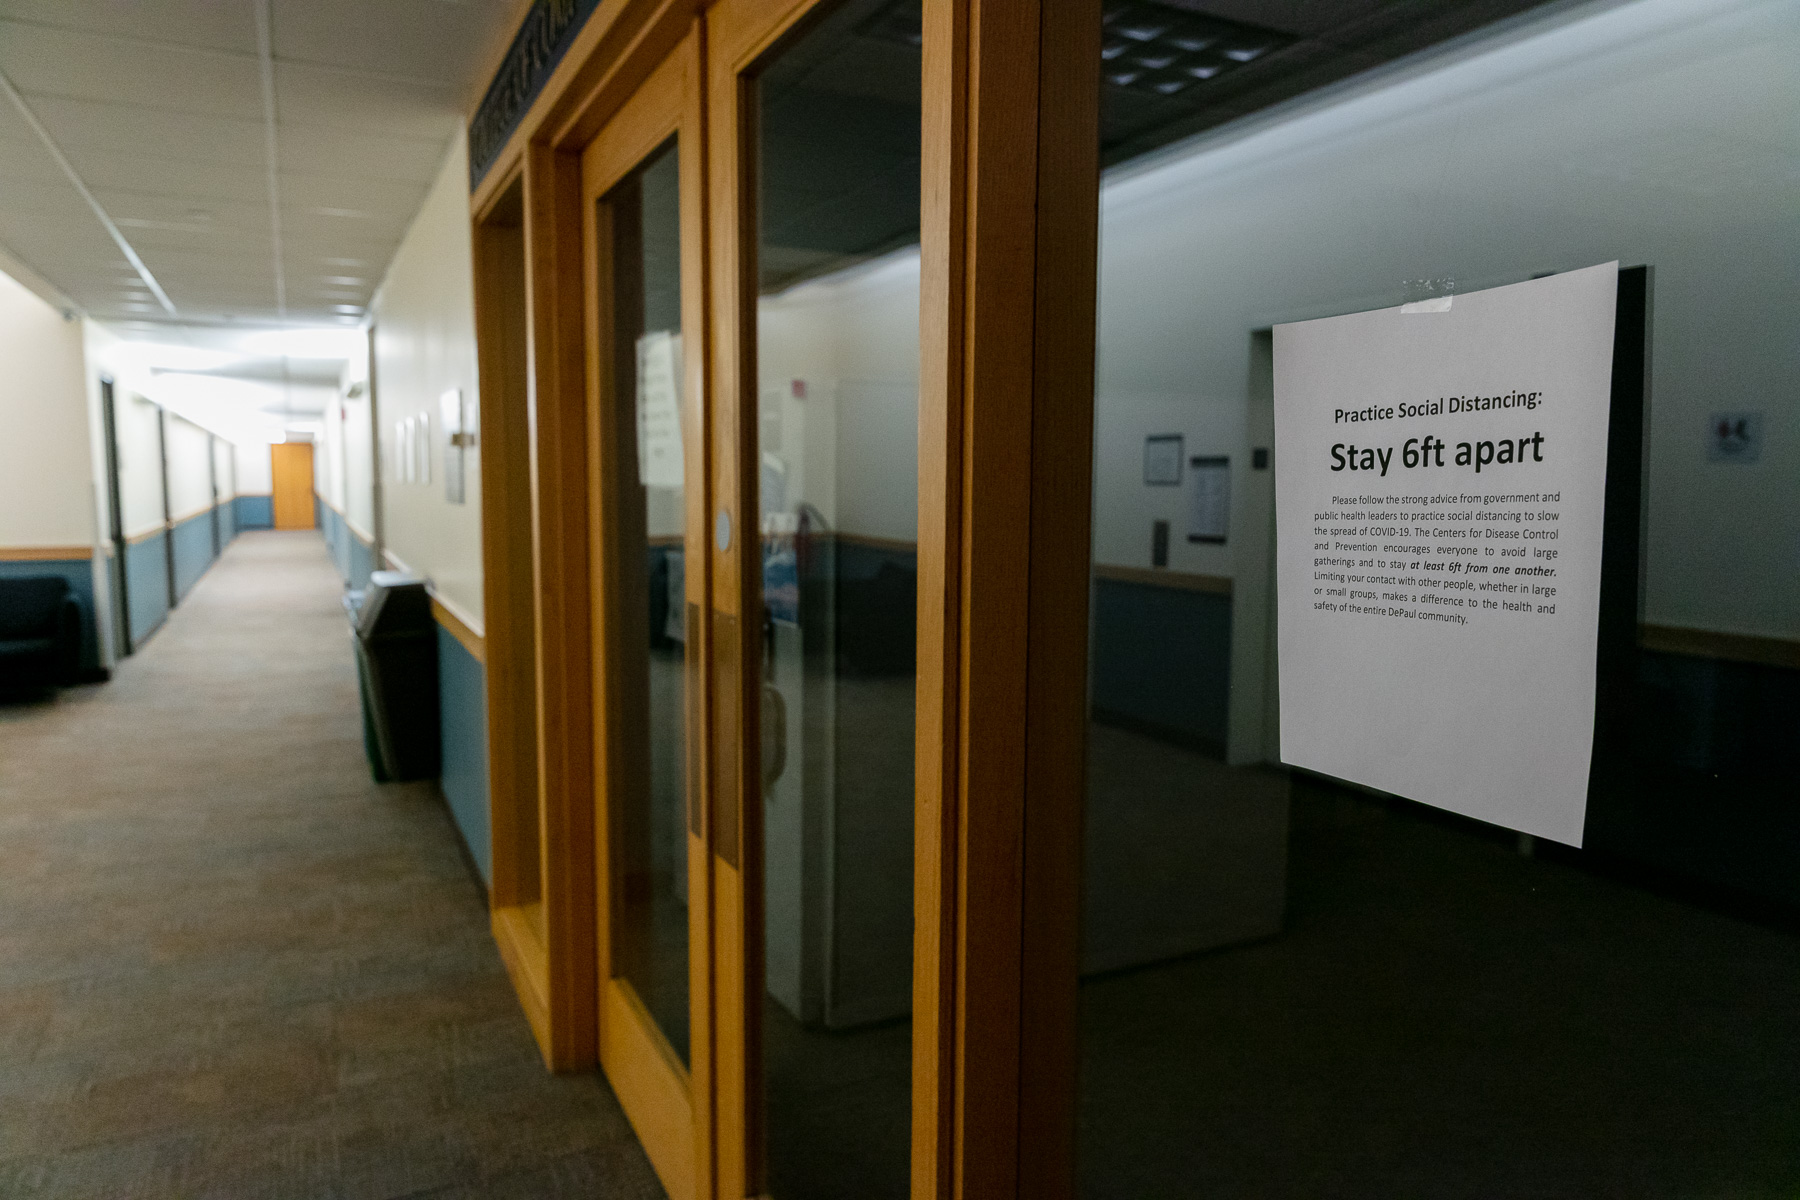 Signs hang outside many campus rooms emphasizing social-distancing of at least six feet. (DePaul University/Randall Spriggs)